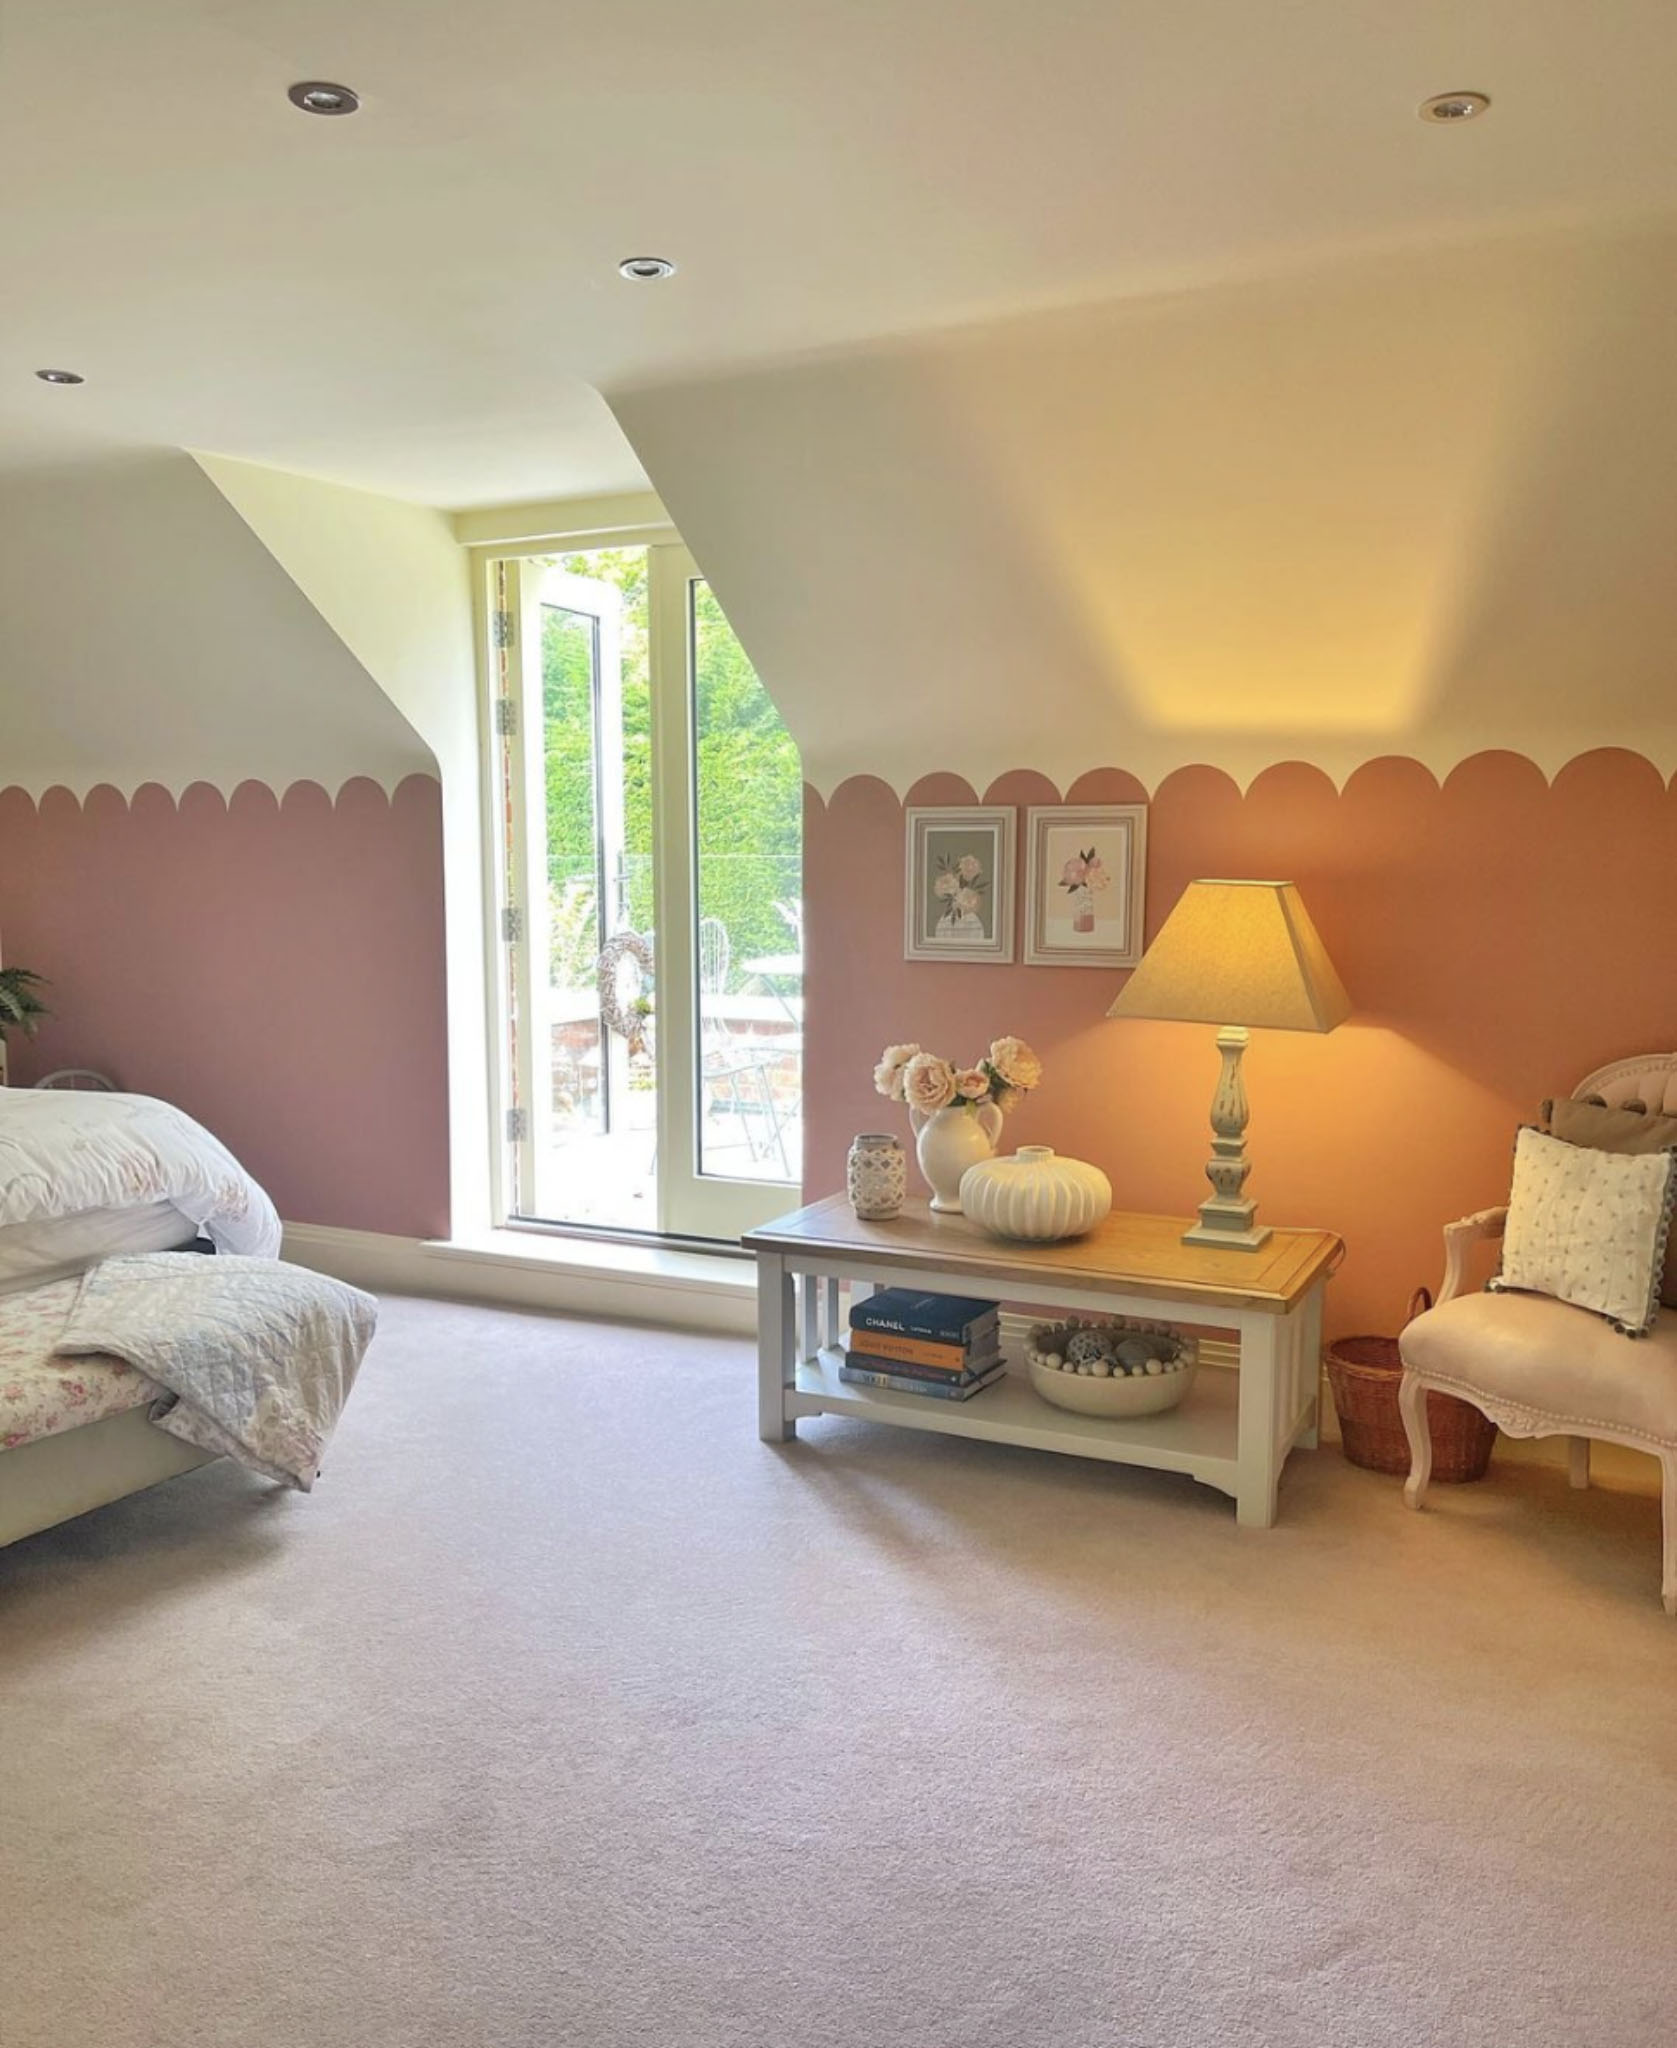 Dulux Heritage Dh Blossom Bedroom Louslovedhome